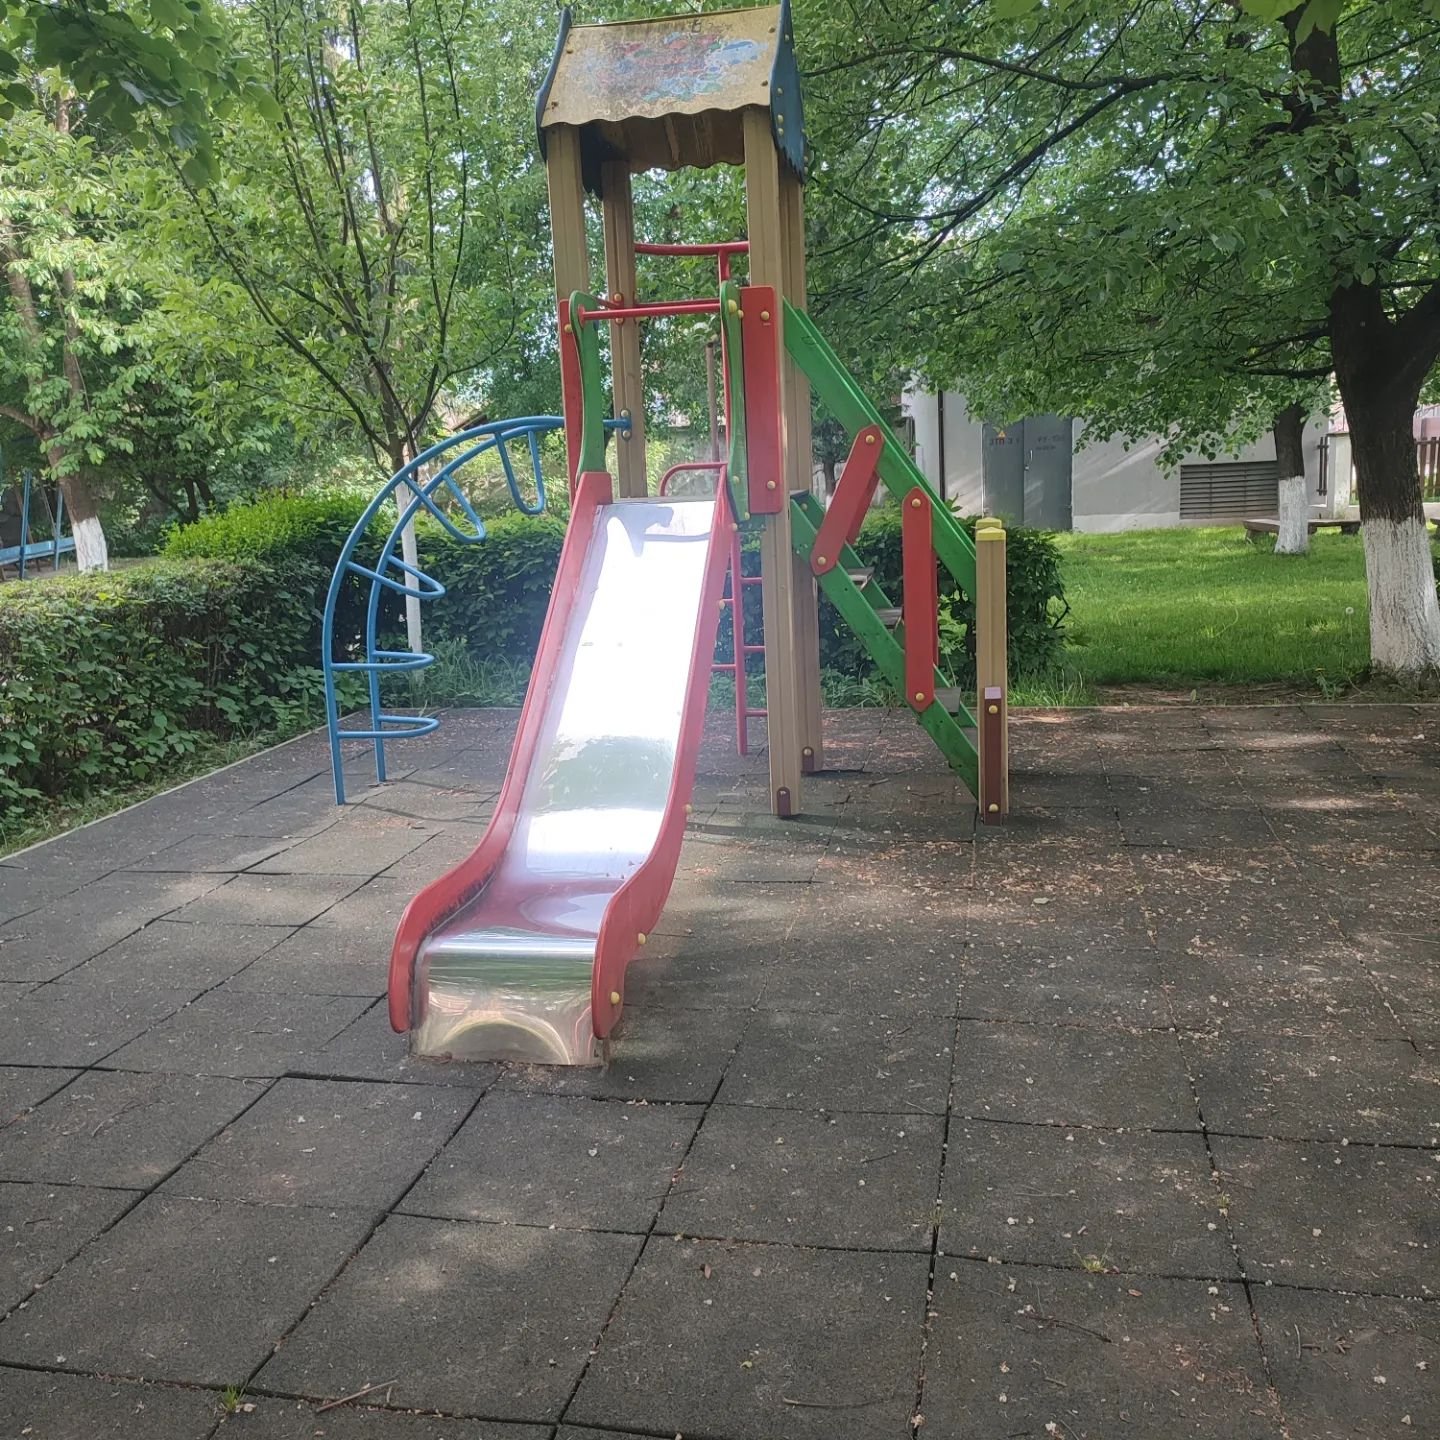 The playground is empty and the grounds are quiet because on this absolutely warm and beautiful day, at a medical facility for children, there are only a few kids allowed outside. Doesn't seem healthy to us. #kidsneedfamilies #ukraineorphans